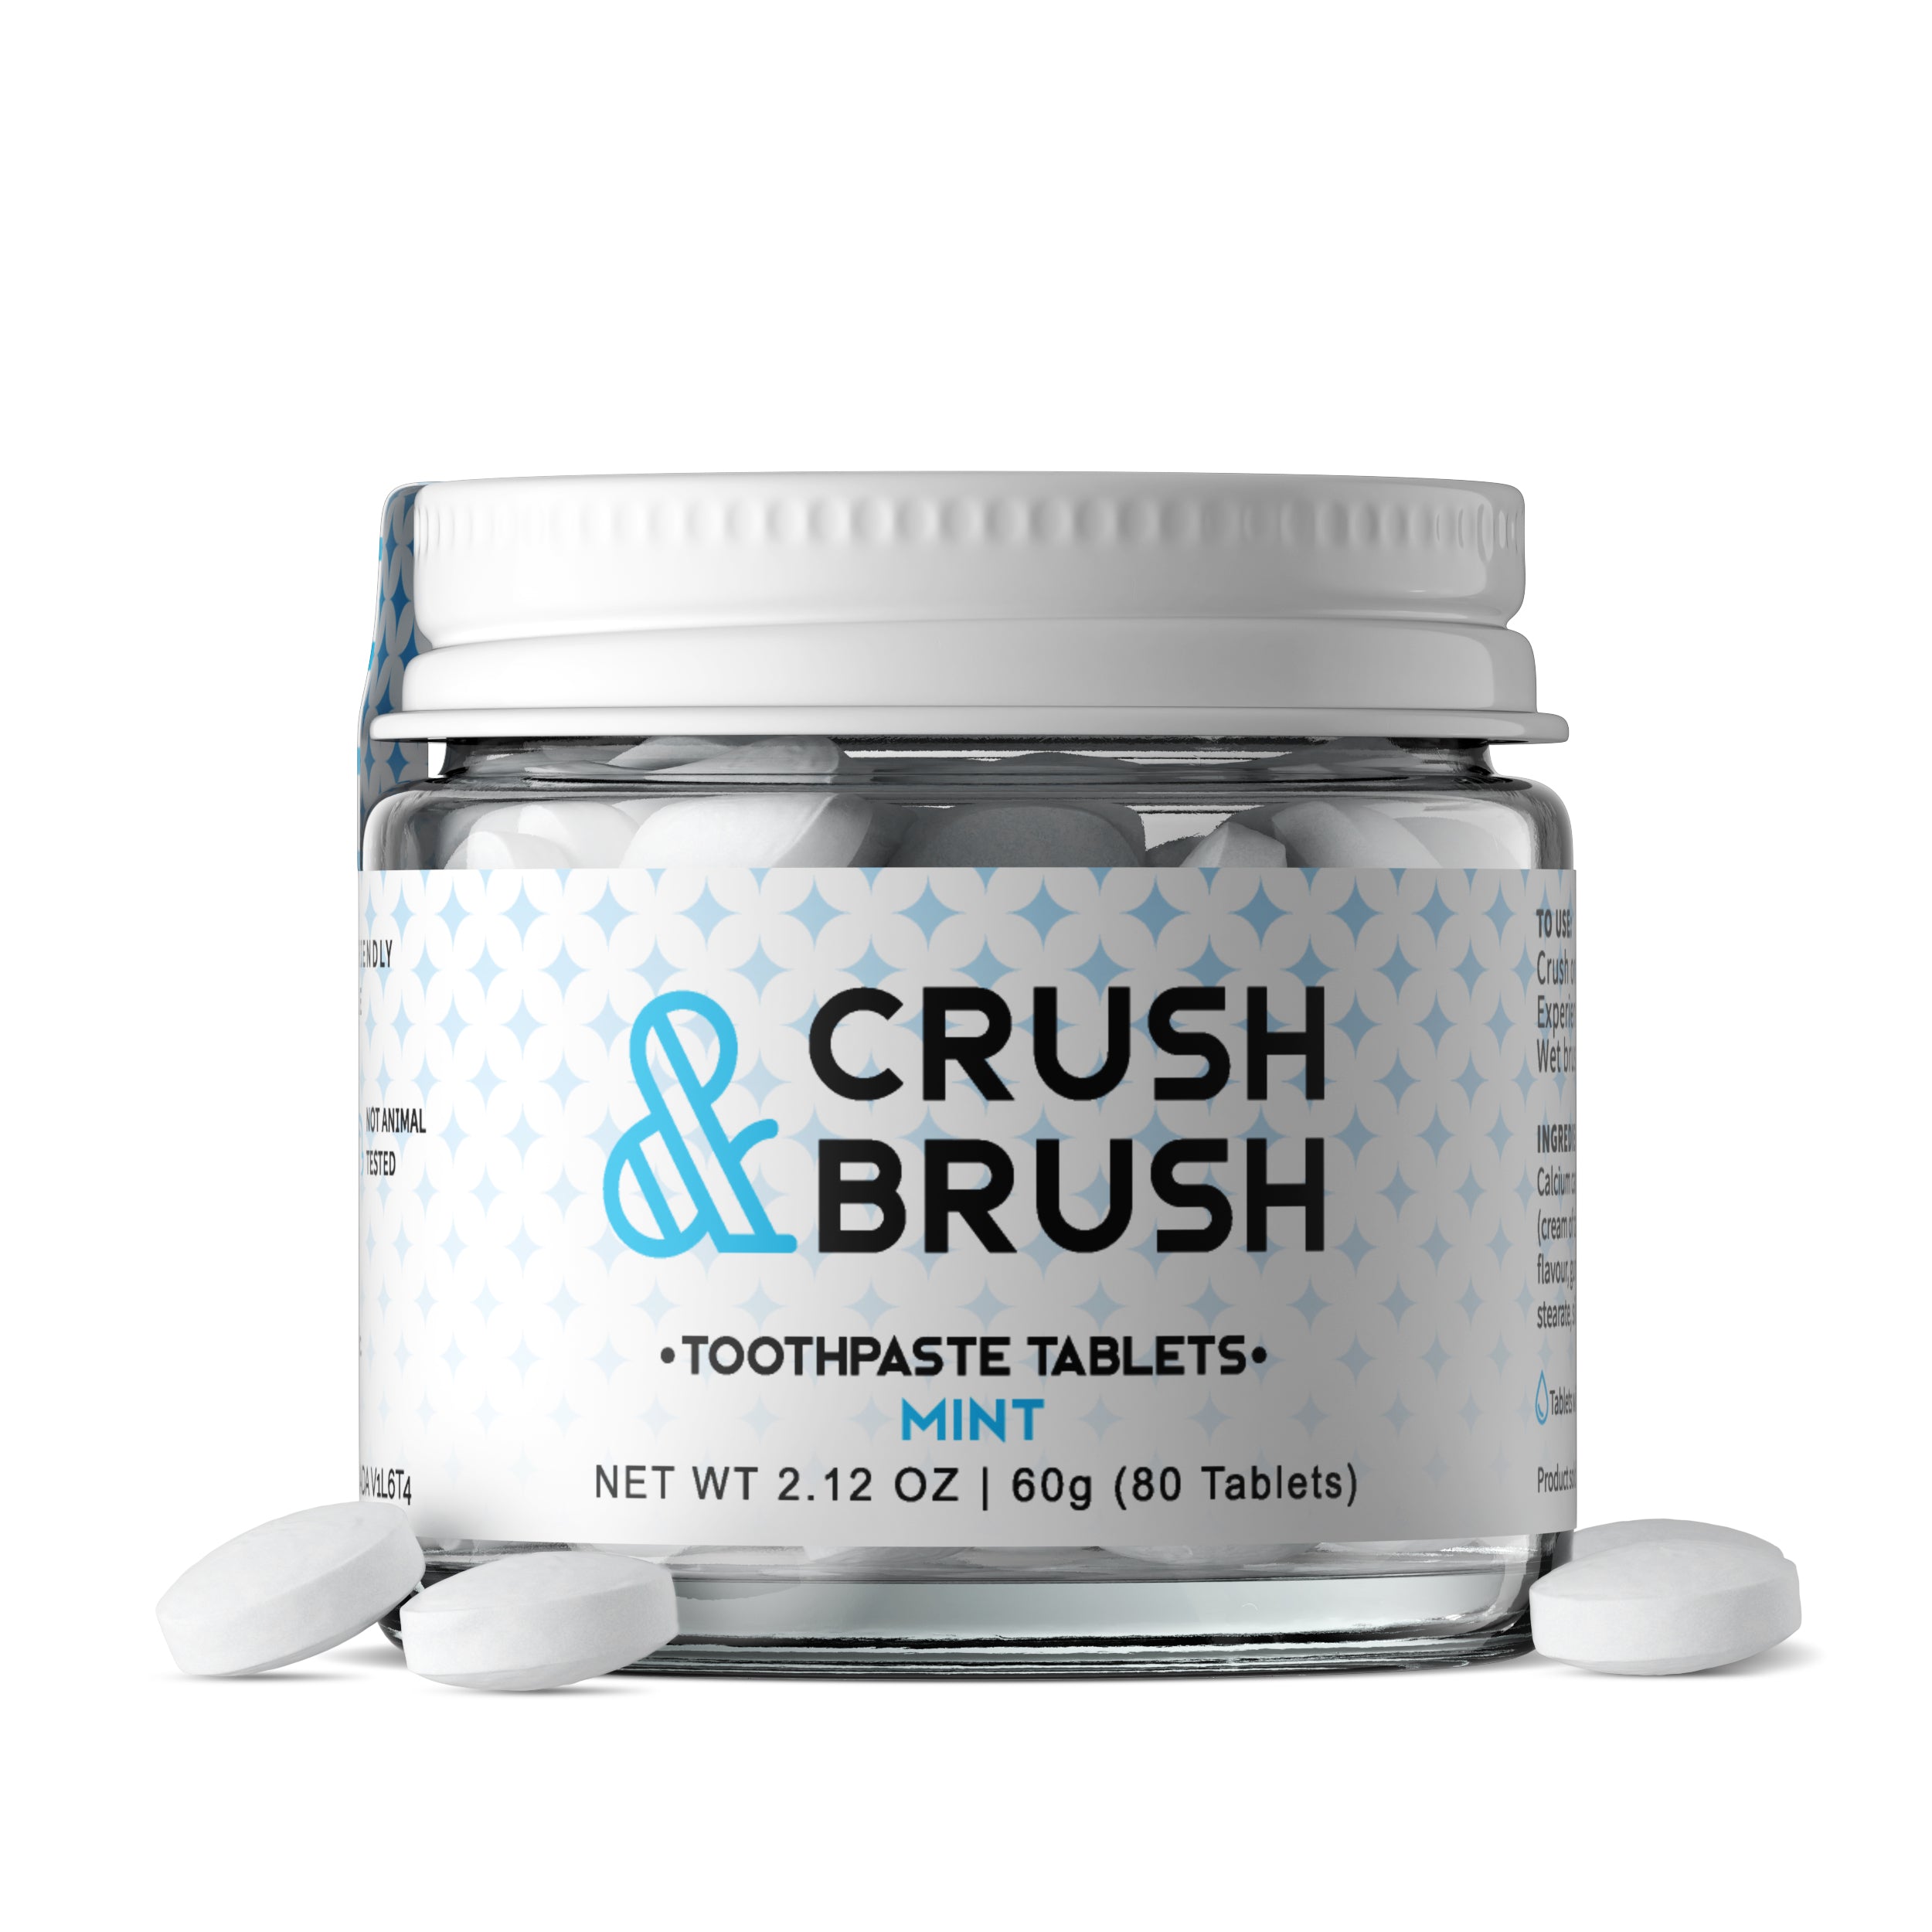 Crush & Brush MINT GLASS JAR - 60g ~ 80 Toothpaste Tablets - WHOLESALE  - nelsonnaturals remineralizing toothpaste